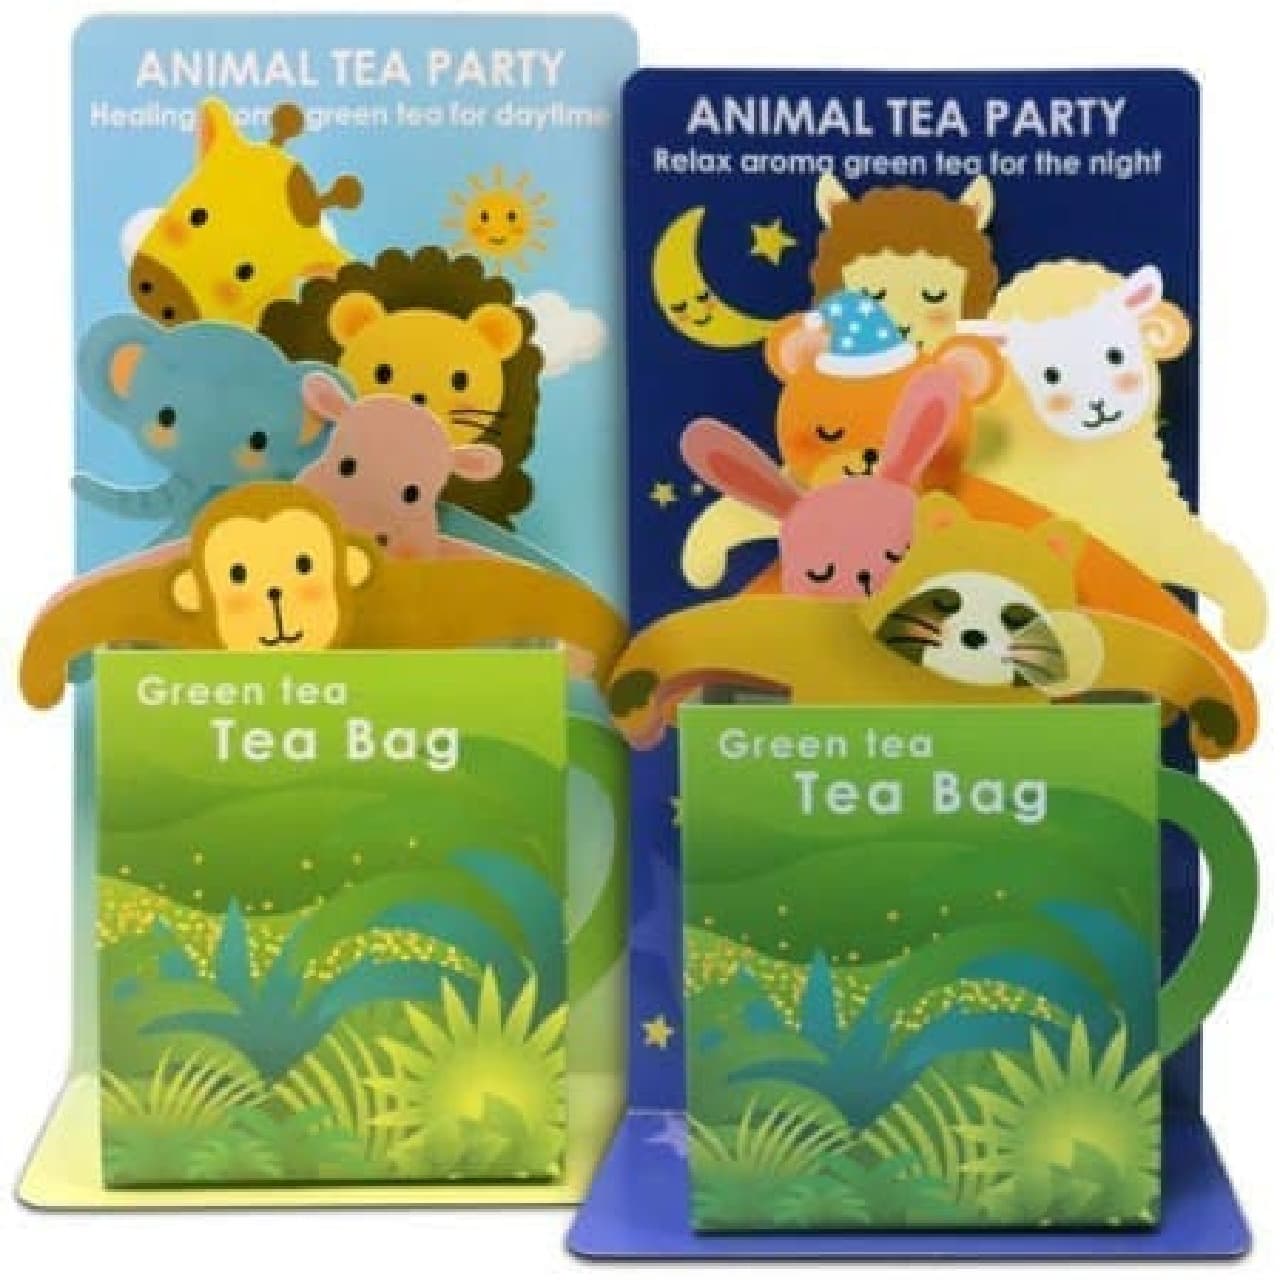 Have a tea time with cute animals!